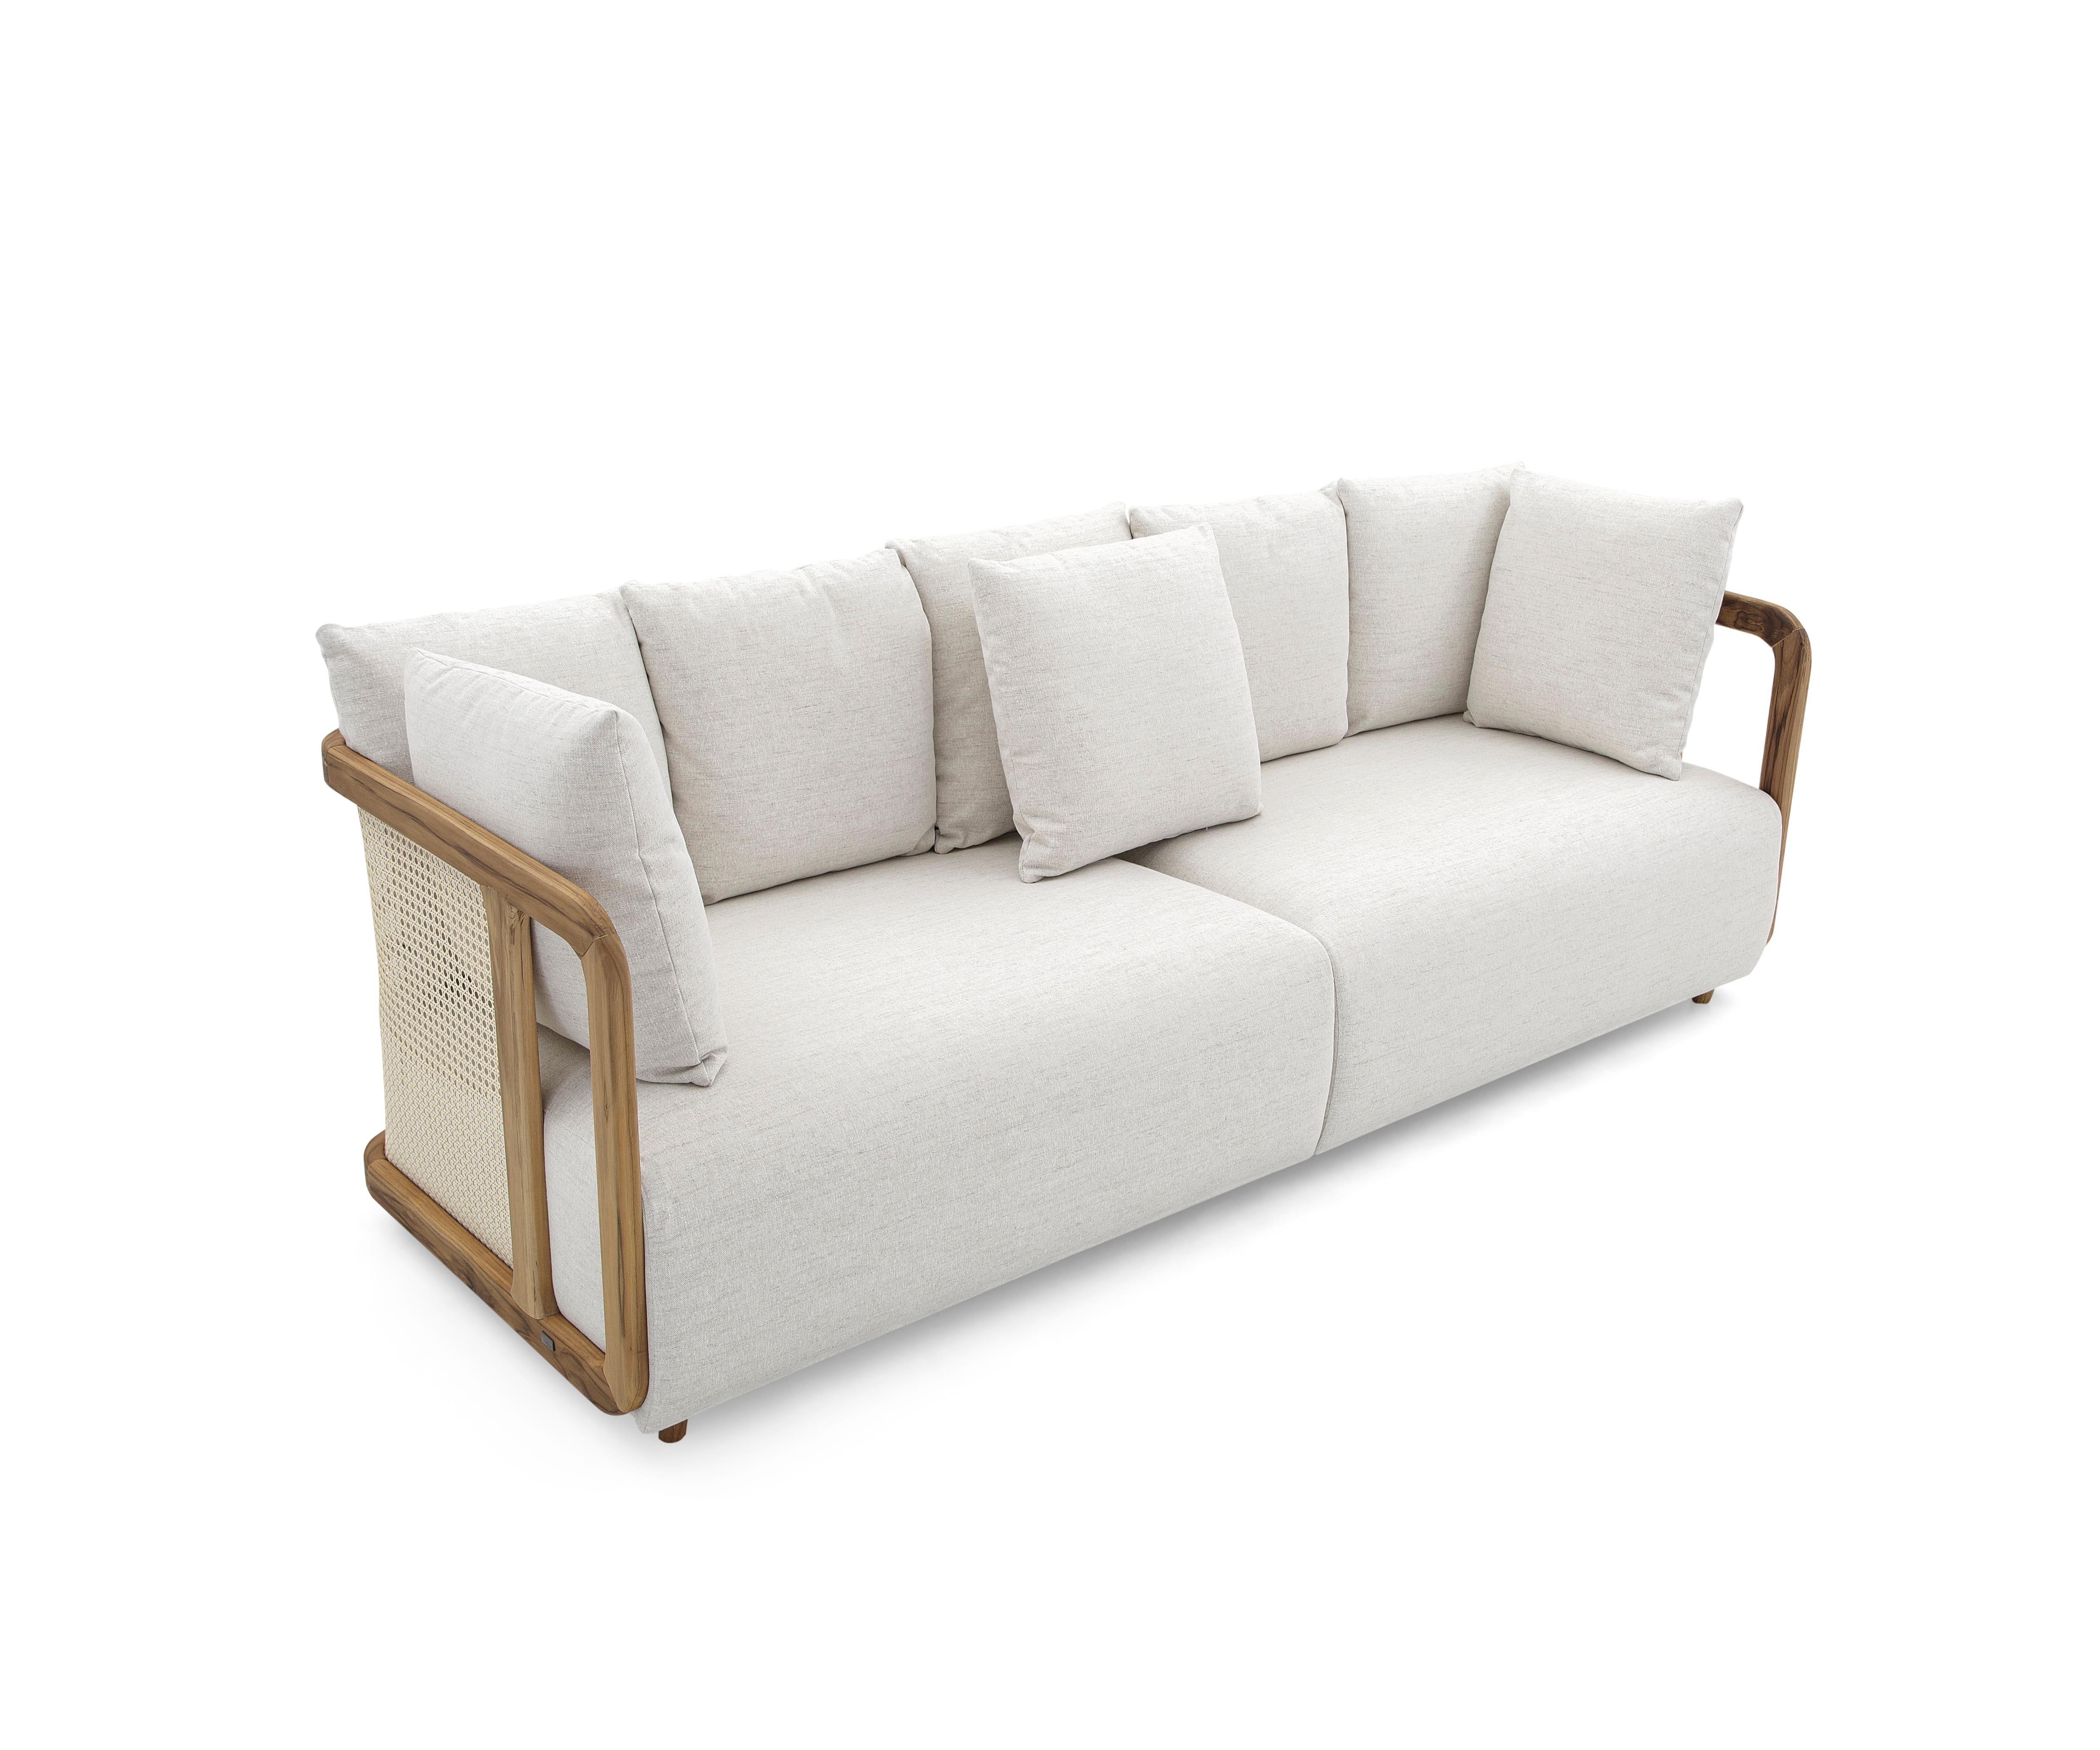 The Aiby sofa is the perfect combination of natural straw in the back and the armrests, a light beige beautiful and soft fabric seat and back pillows, and wood legs in a teak Uultis finish to match this modern contemporary design. The backrest